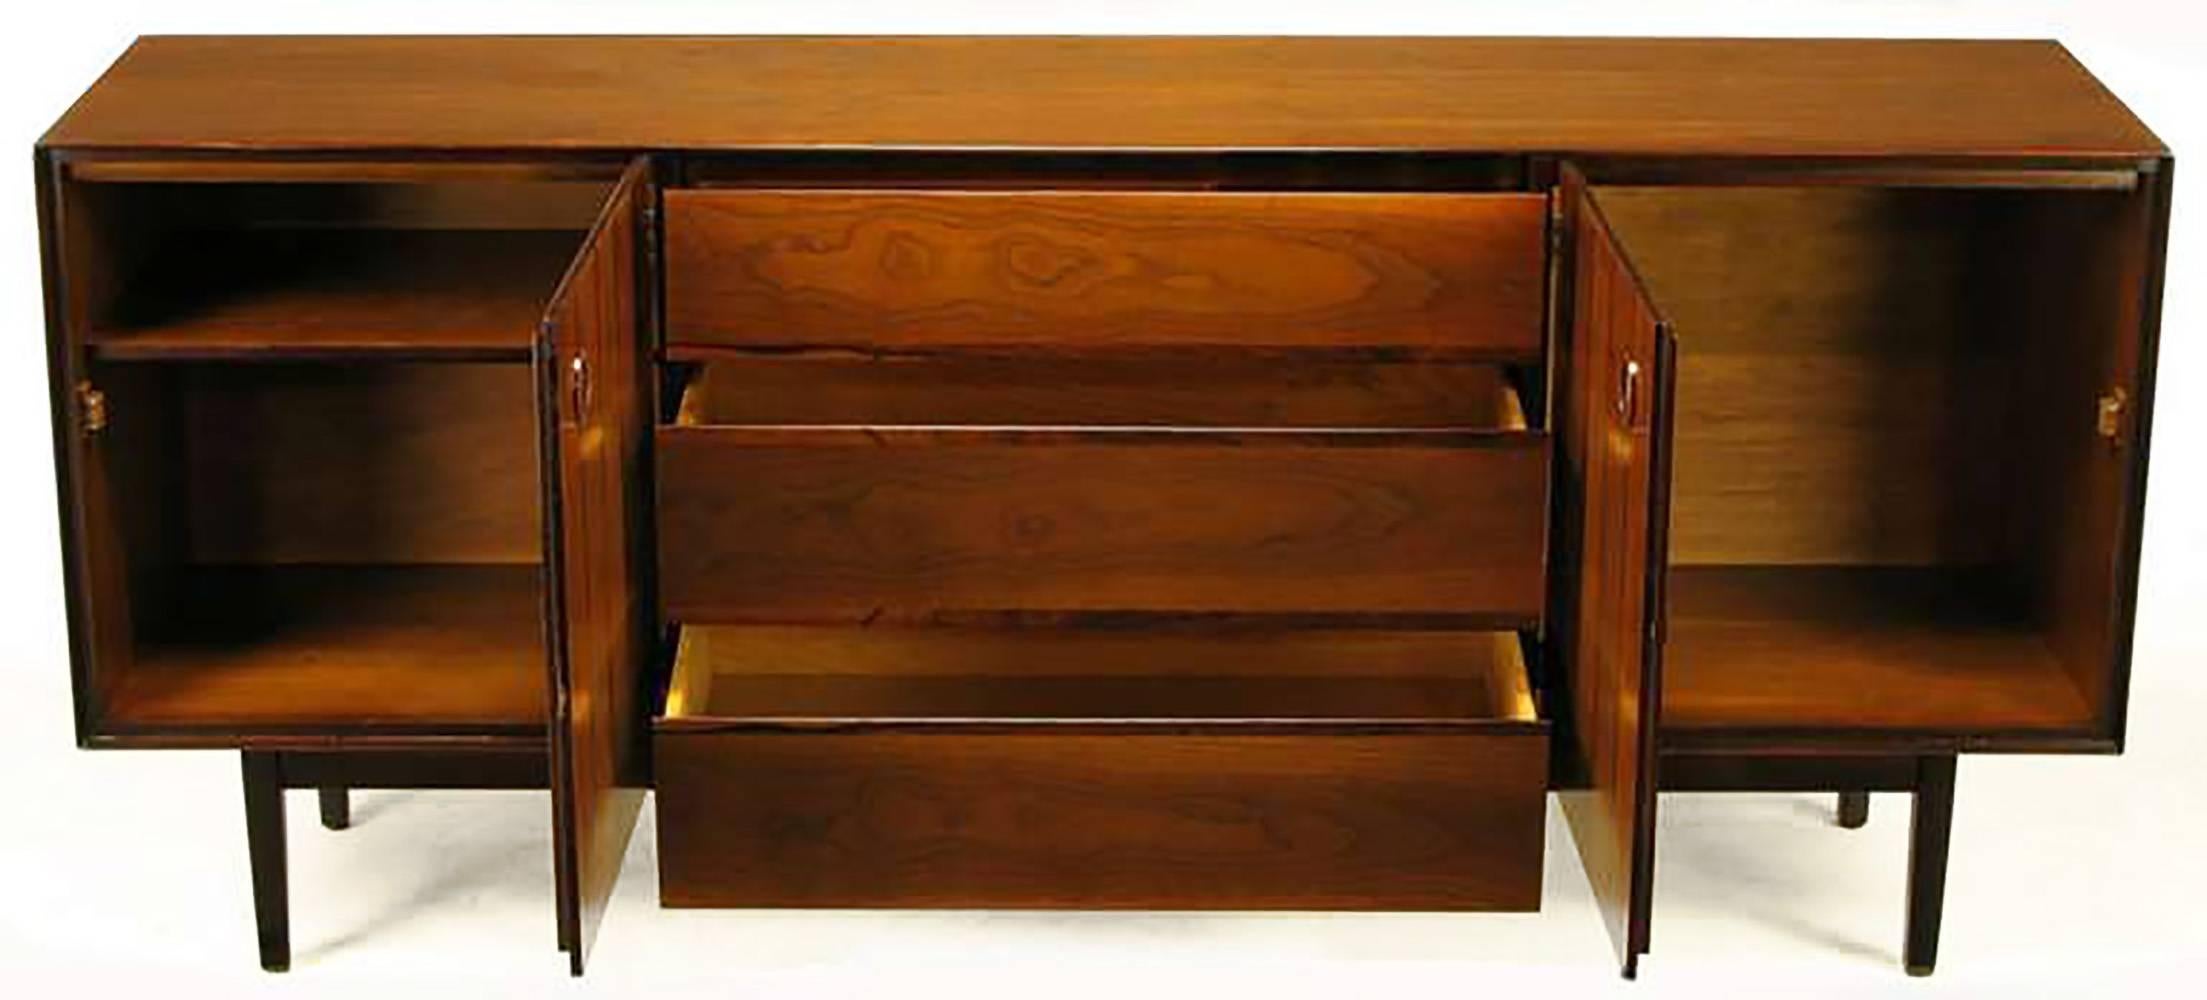 American Rosewood and Walnut Parquetry Front Credenza